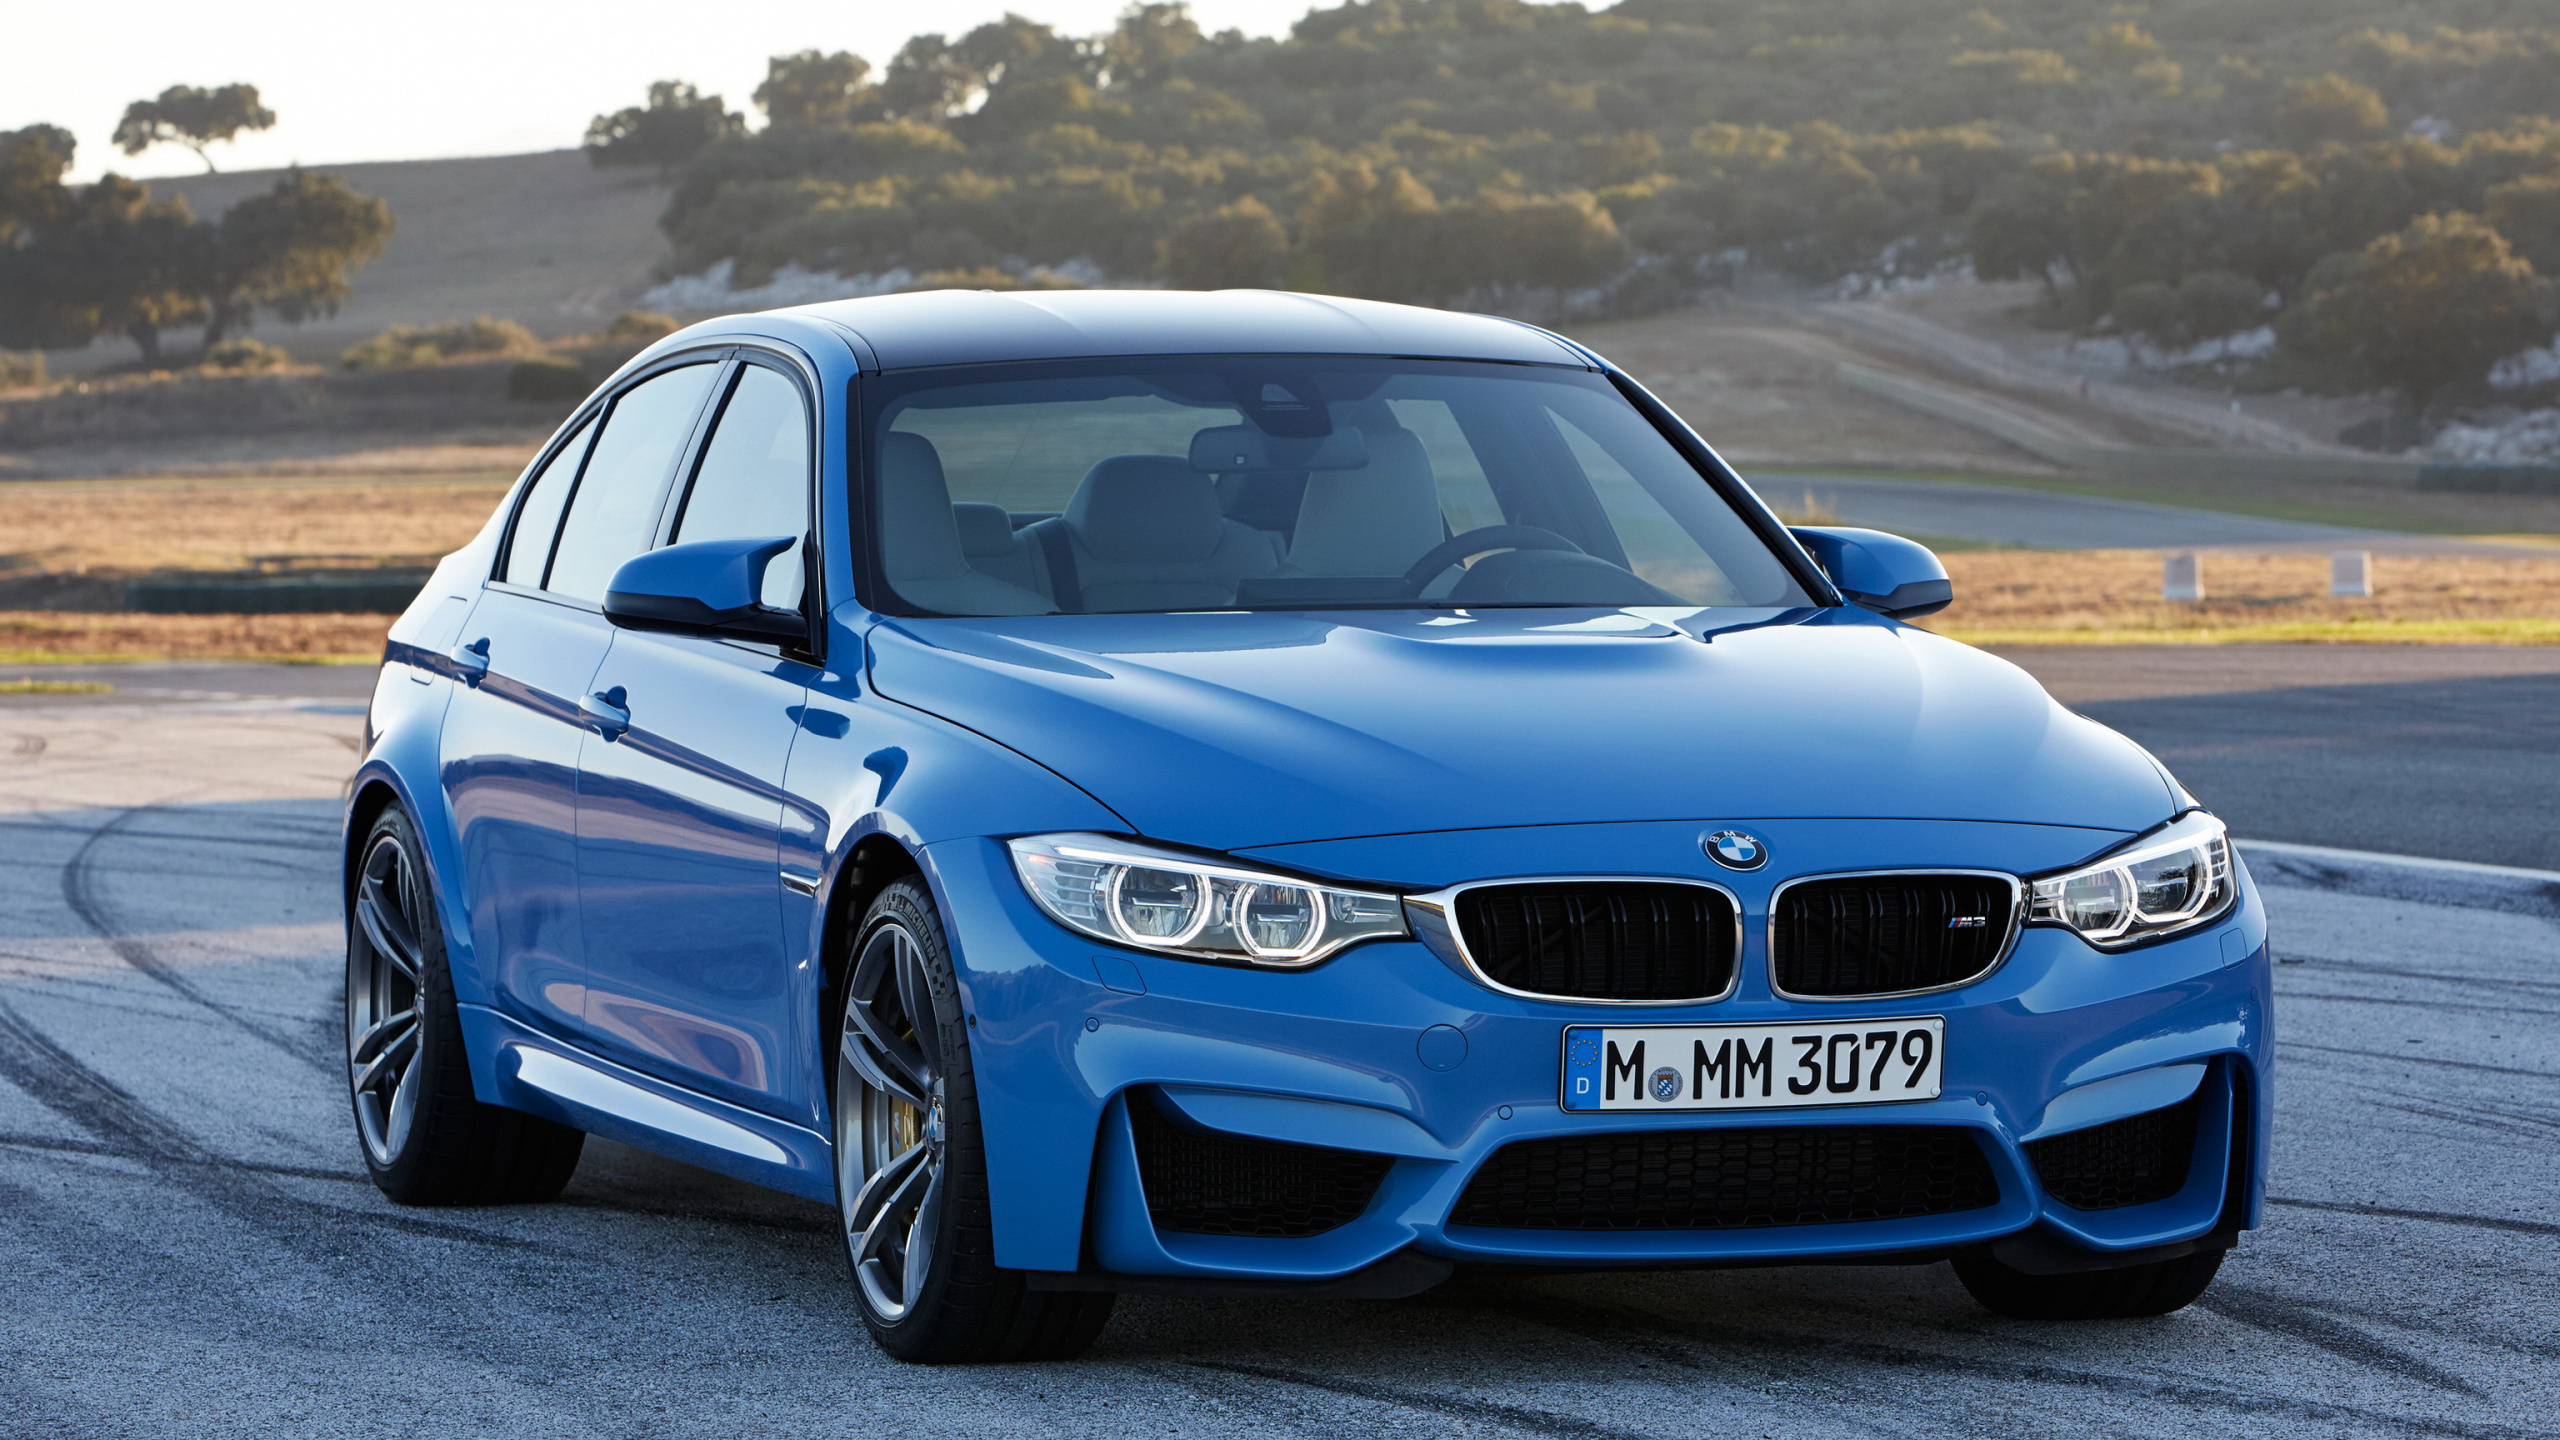 Blue Bmw m 3 on Road During Daytime. Wallpaper in 2560x1440 Resolution